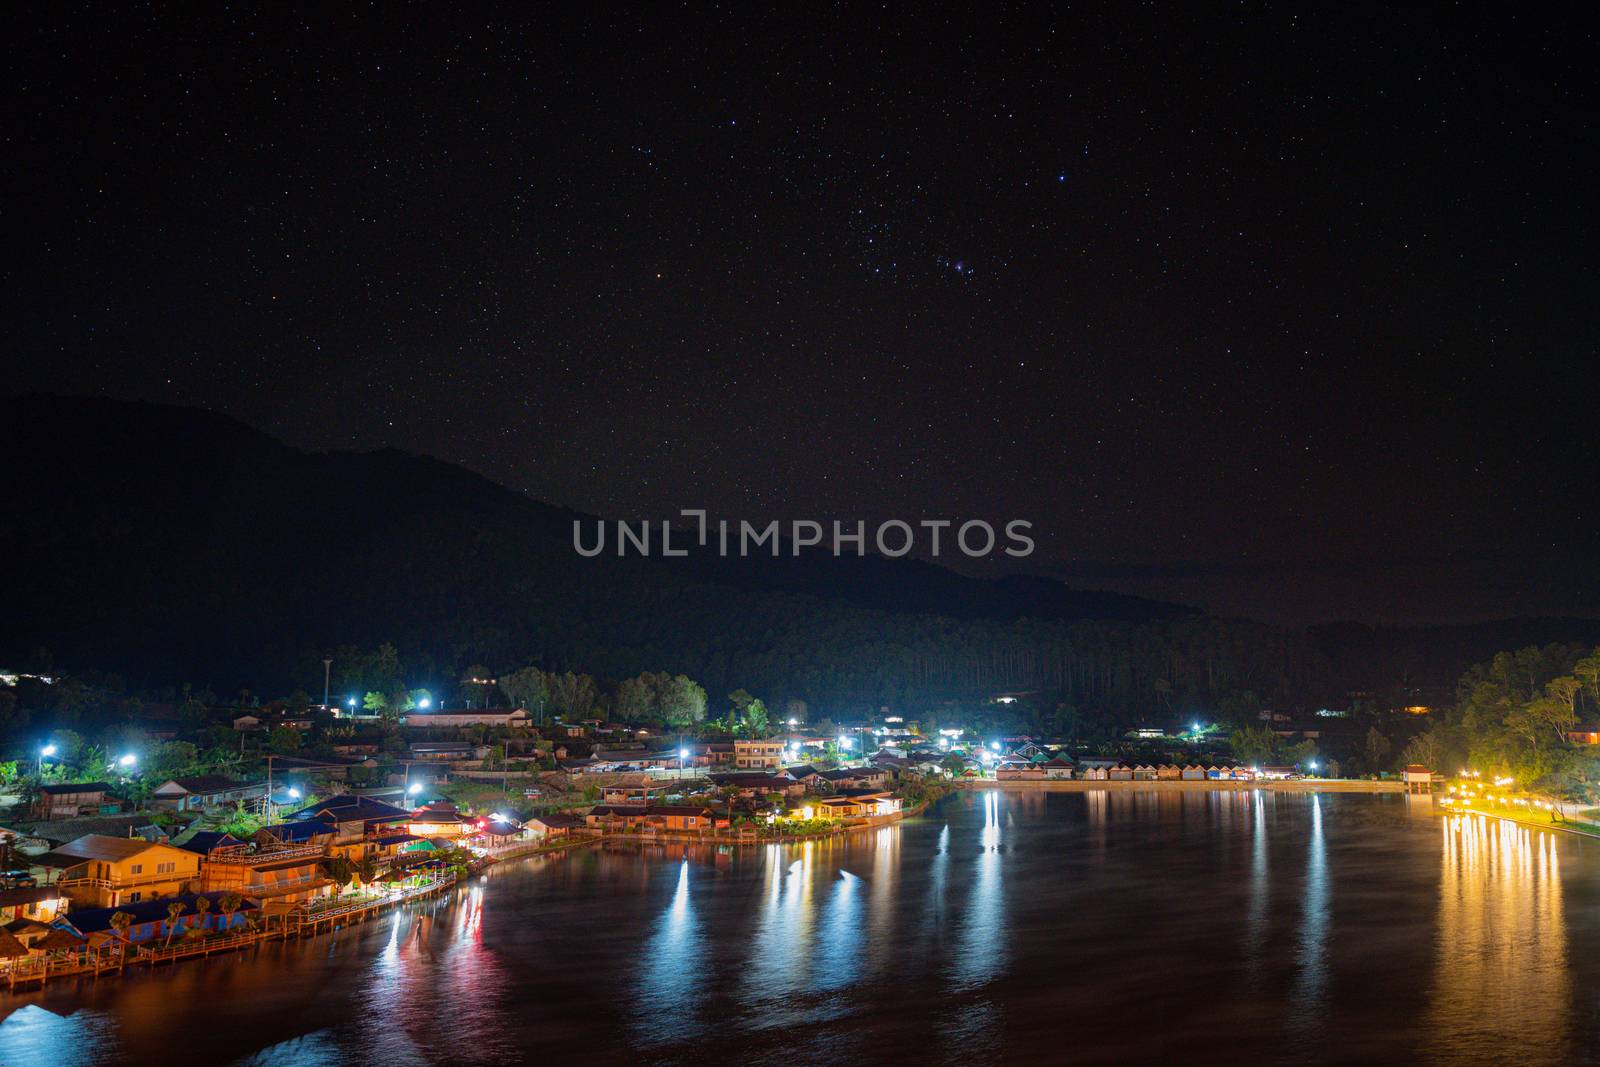 Landscape night view and Constellations of stars at night a smal by bbbirdz